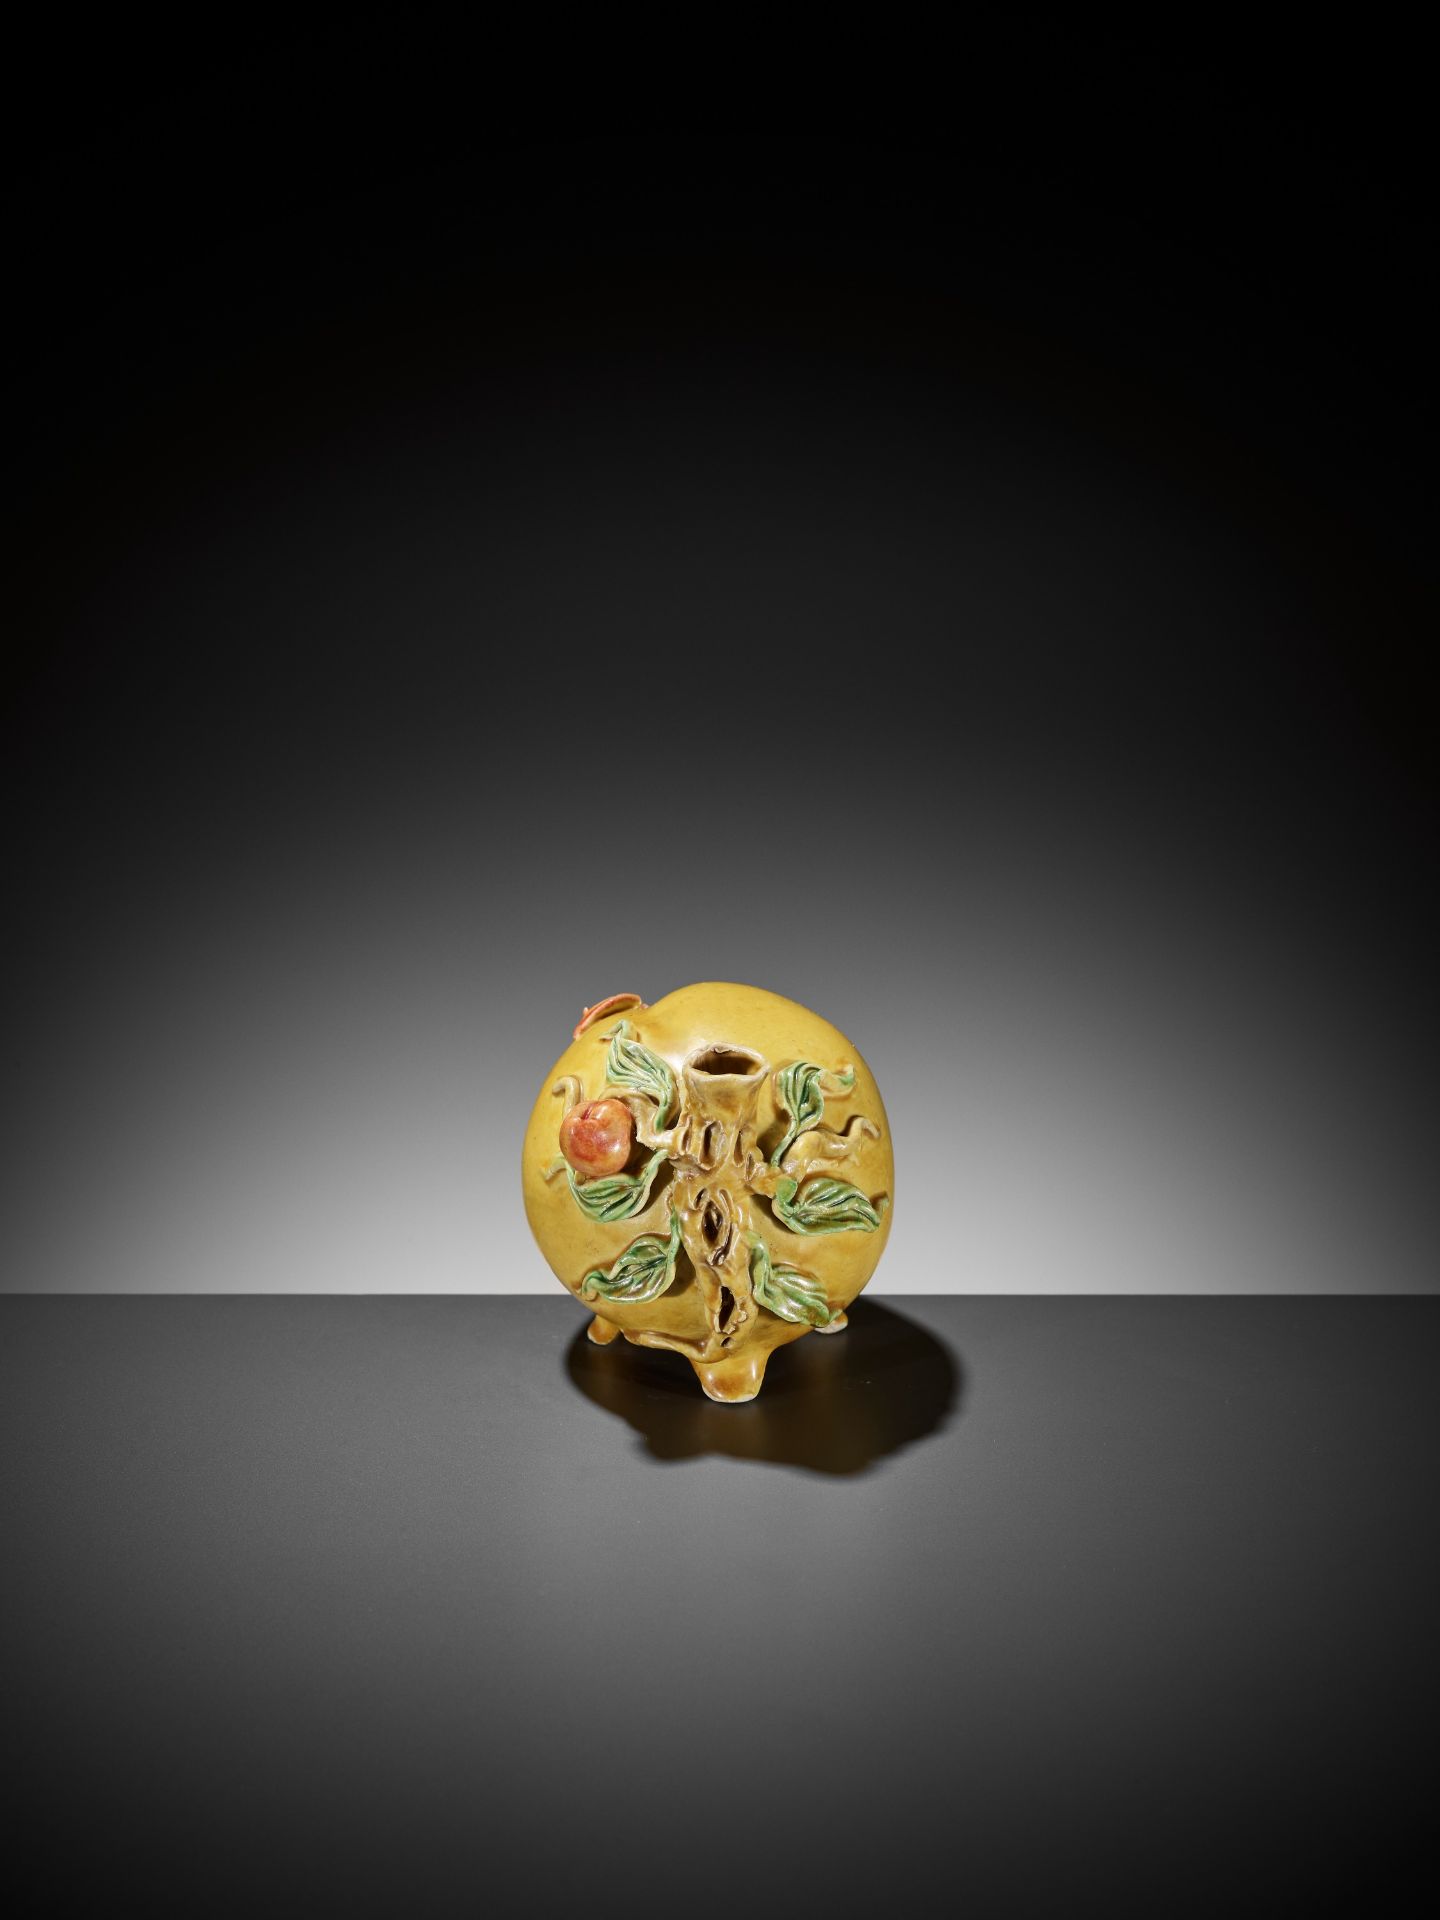 AN IMPERIAL YELLOW GLAZED PEACH-FORM WATER DROPPER, QING DYNASTY - Image 3 of 7